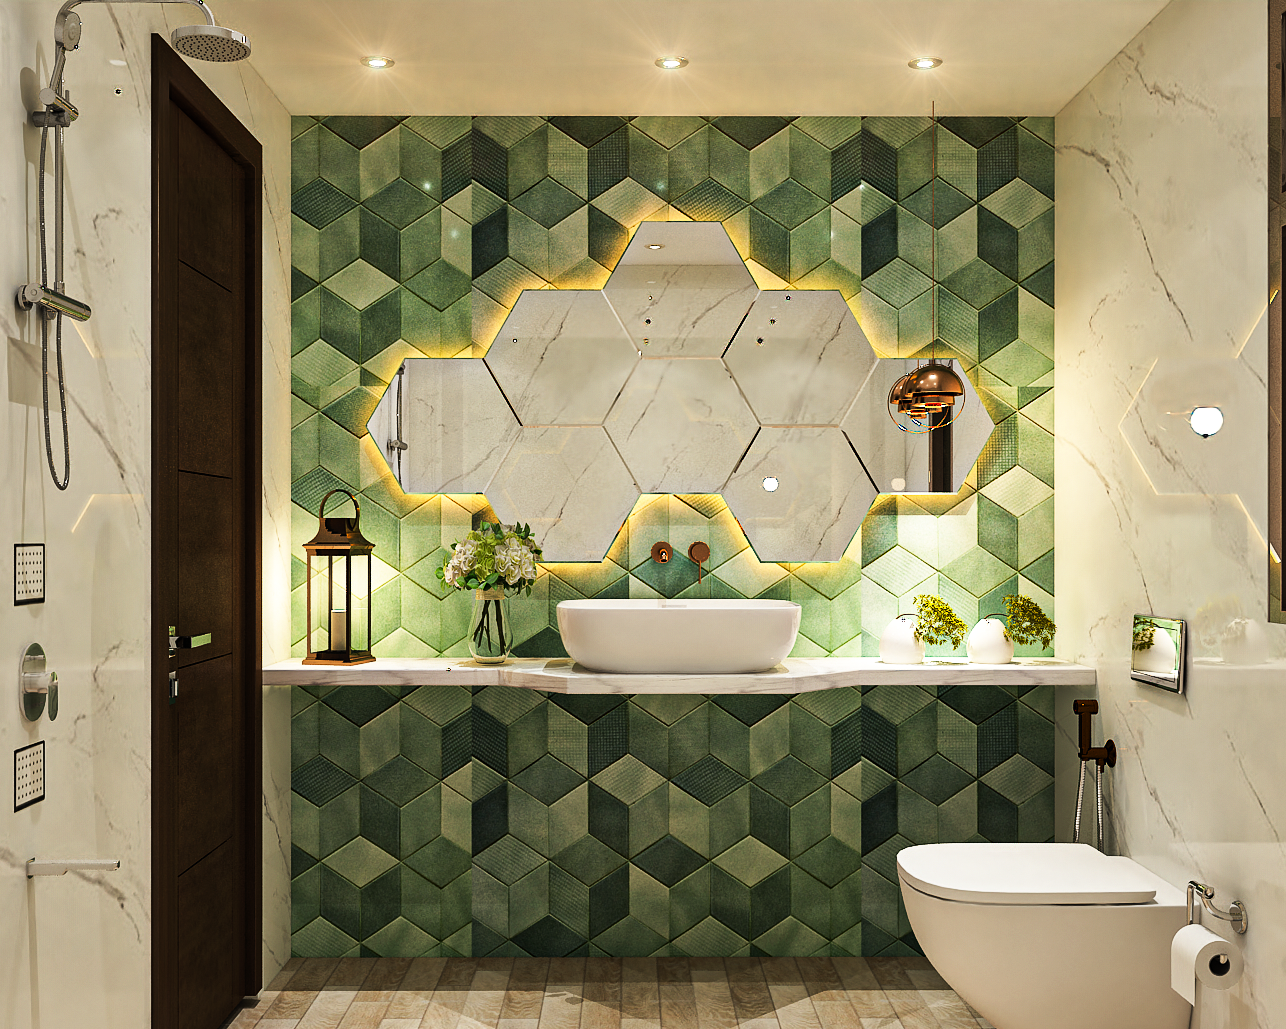 Compact Bathroom Design With Moss Green Tiling